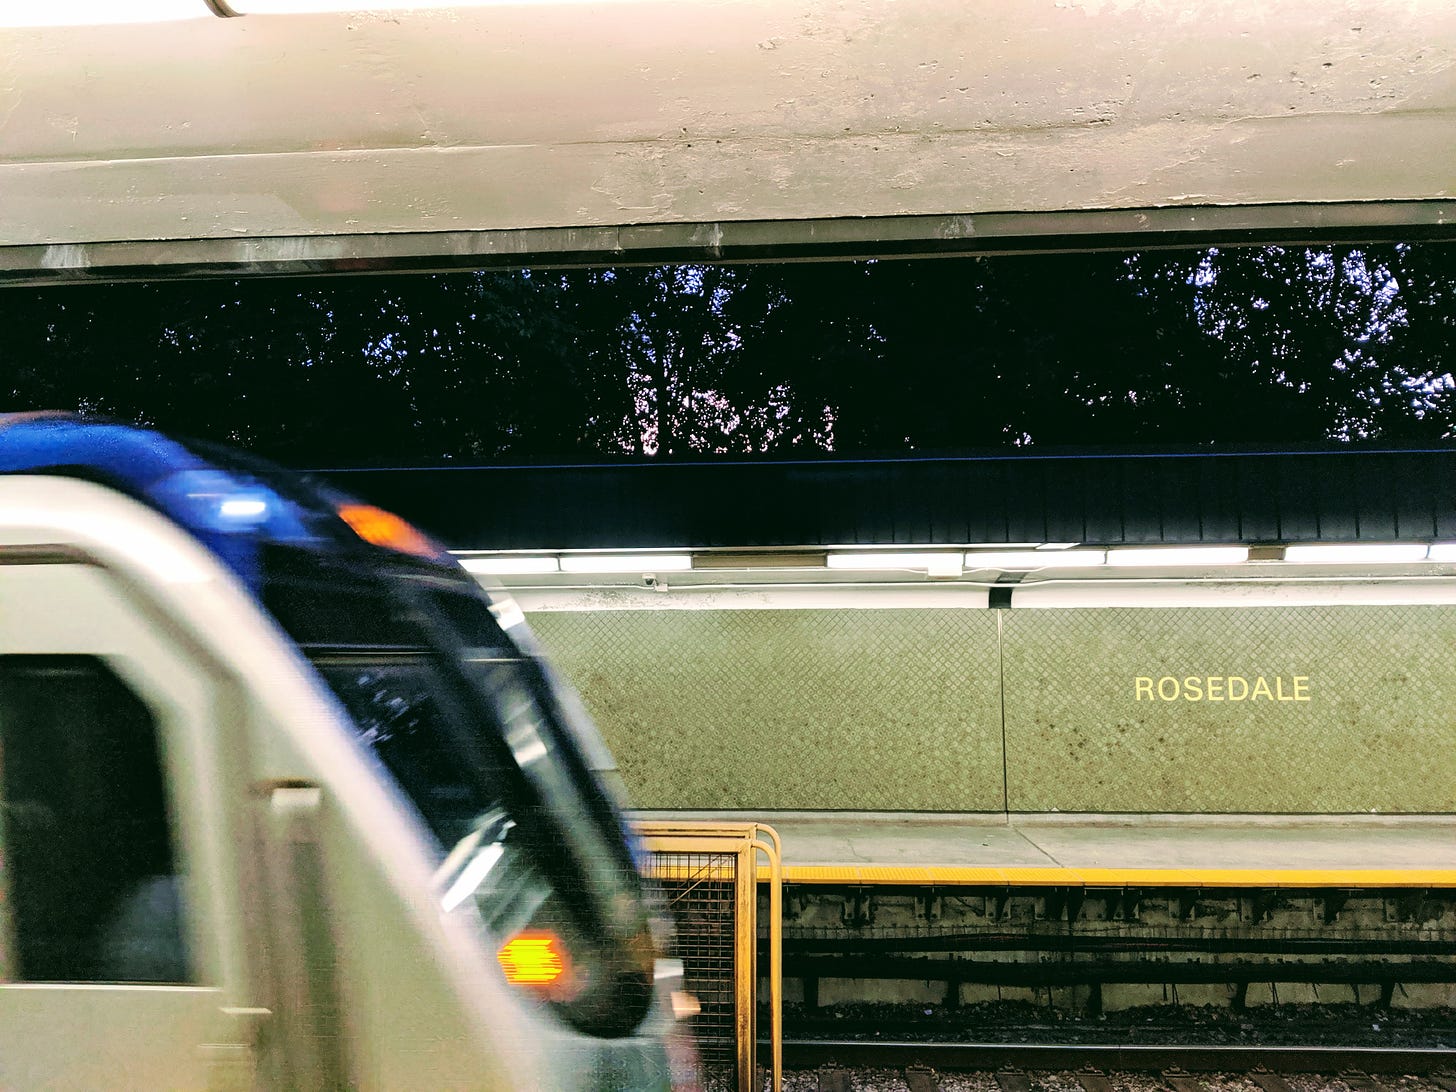 a train entering rosedale station in Toronto.